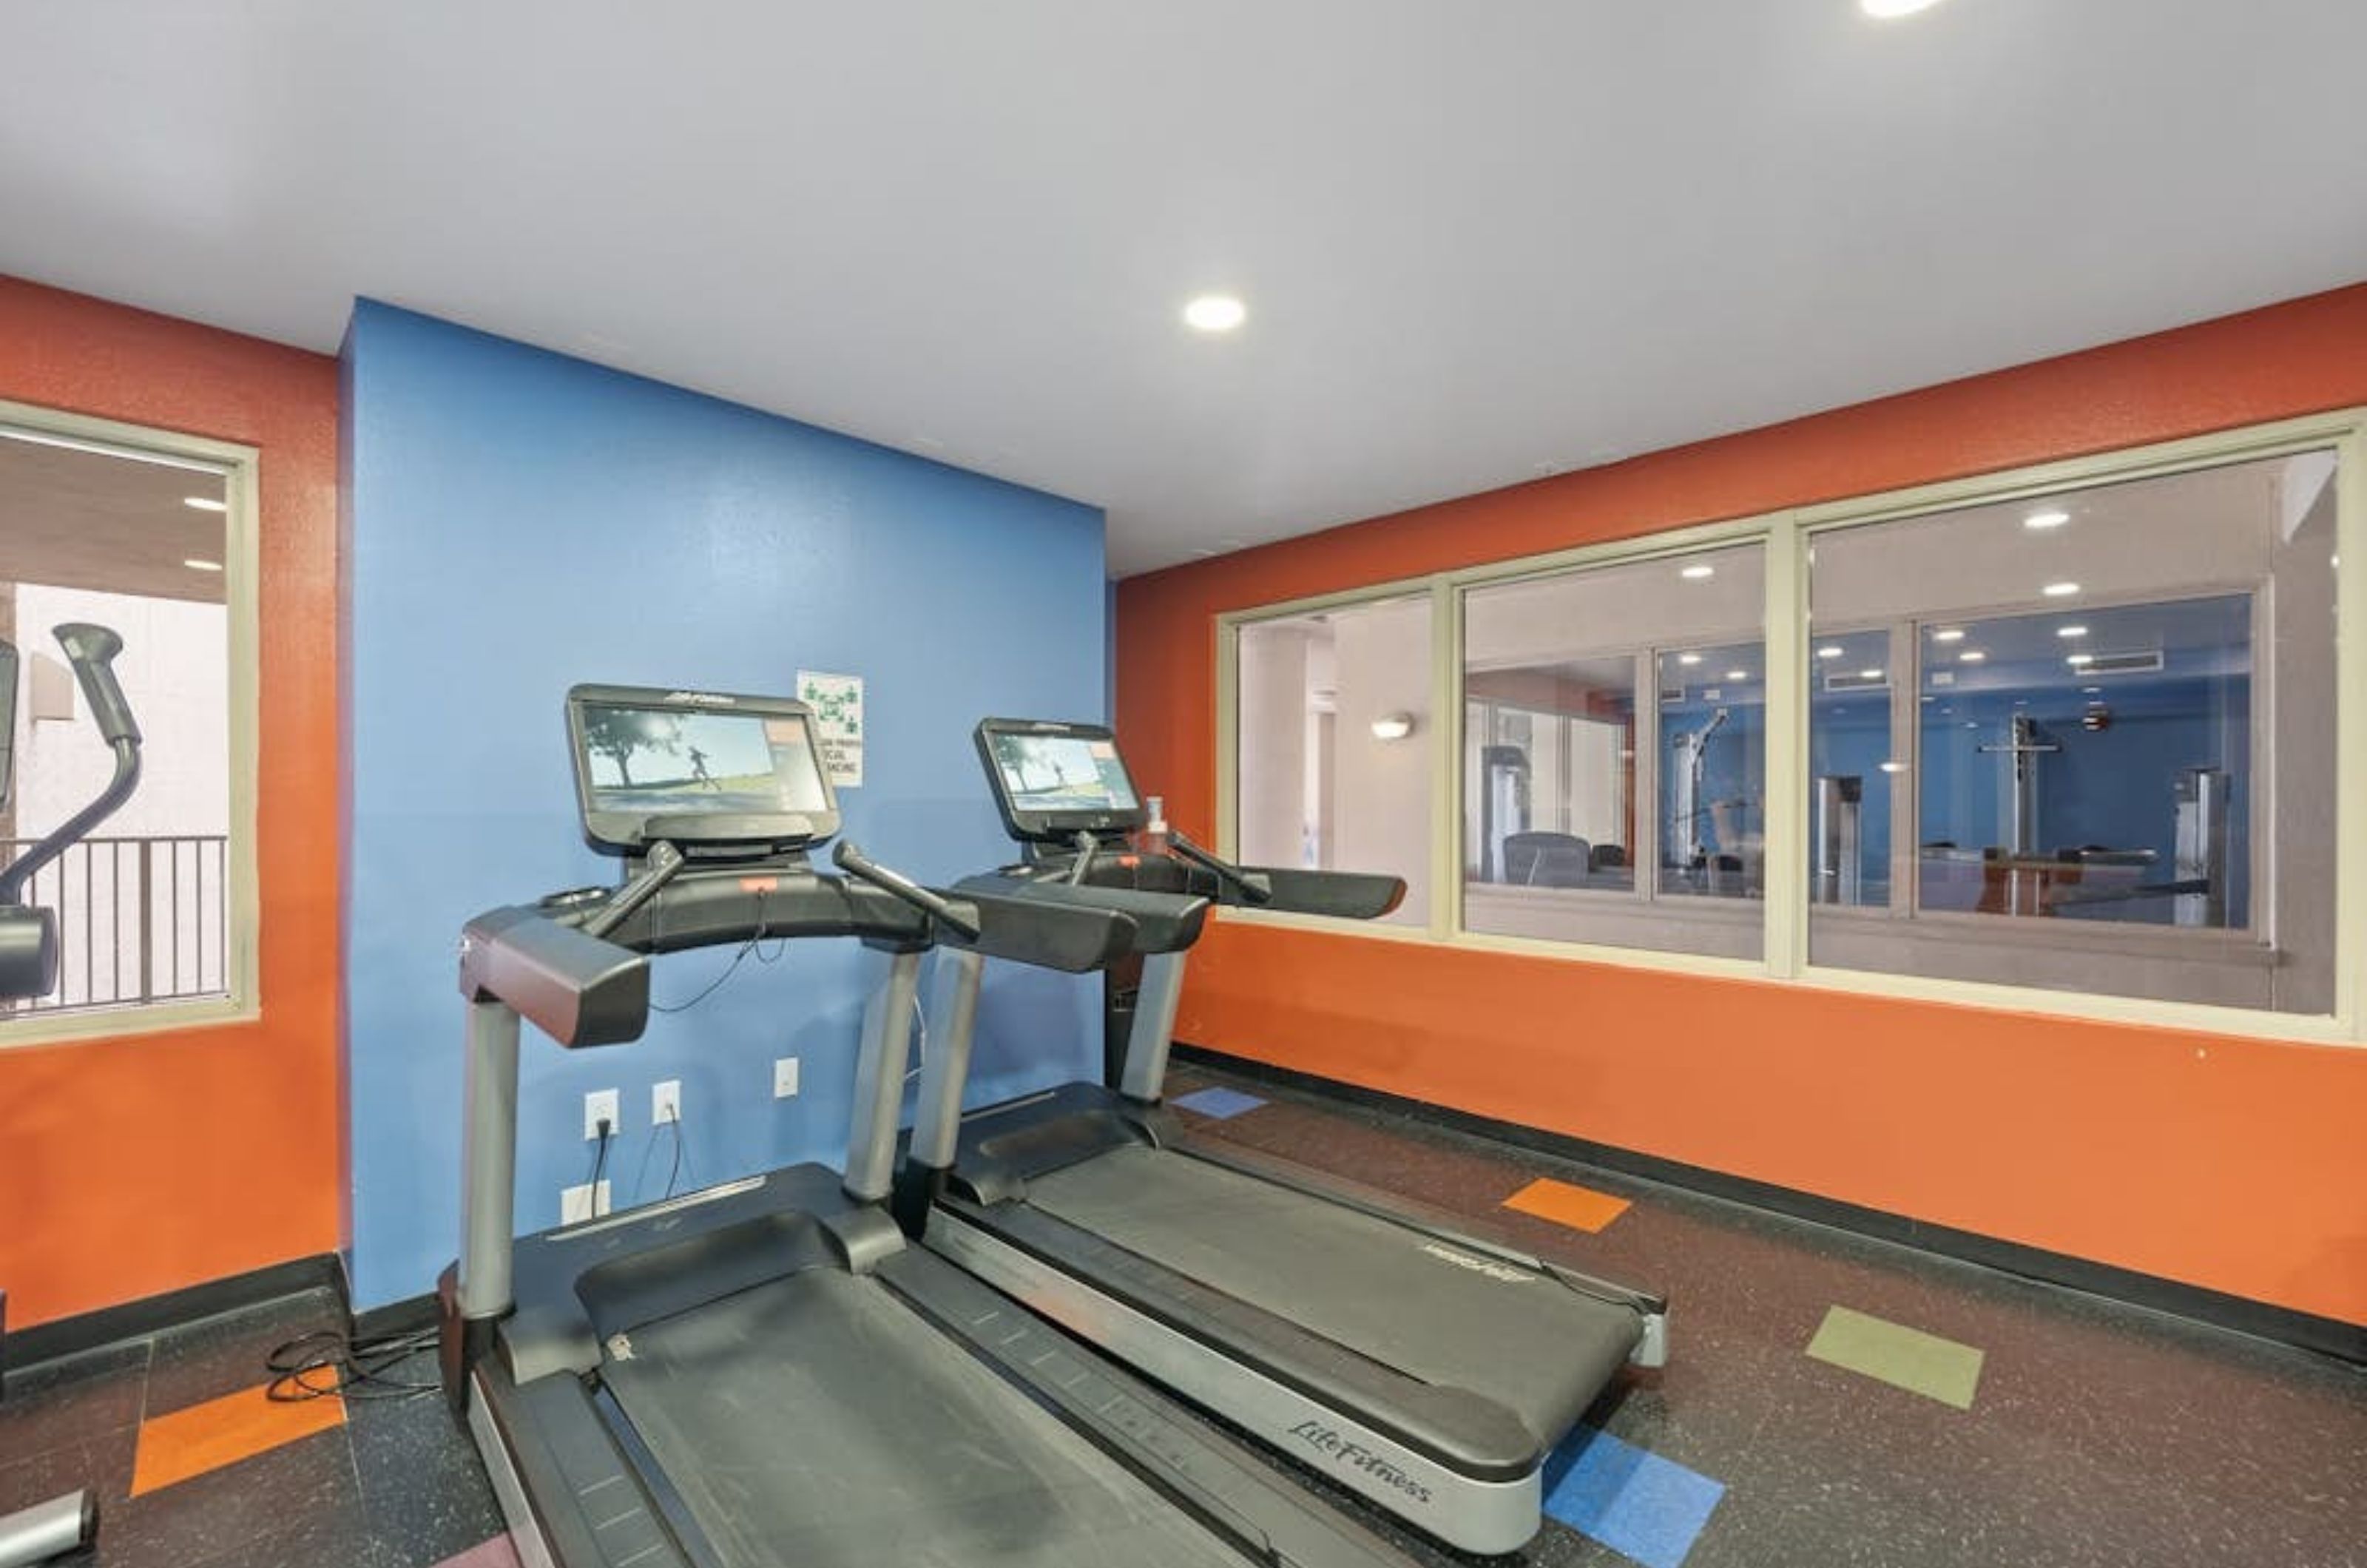 Treadmills in the fitness center at the Shores of Panama 